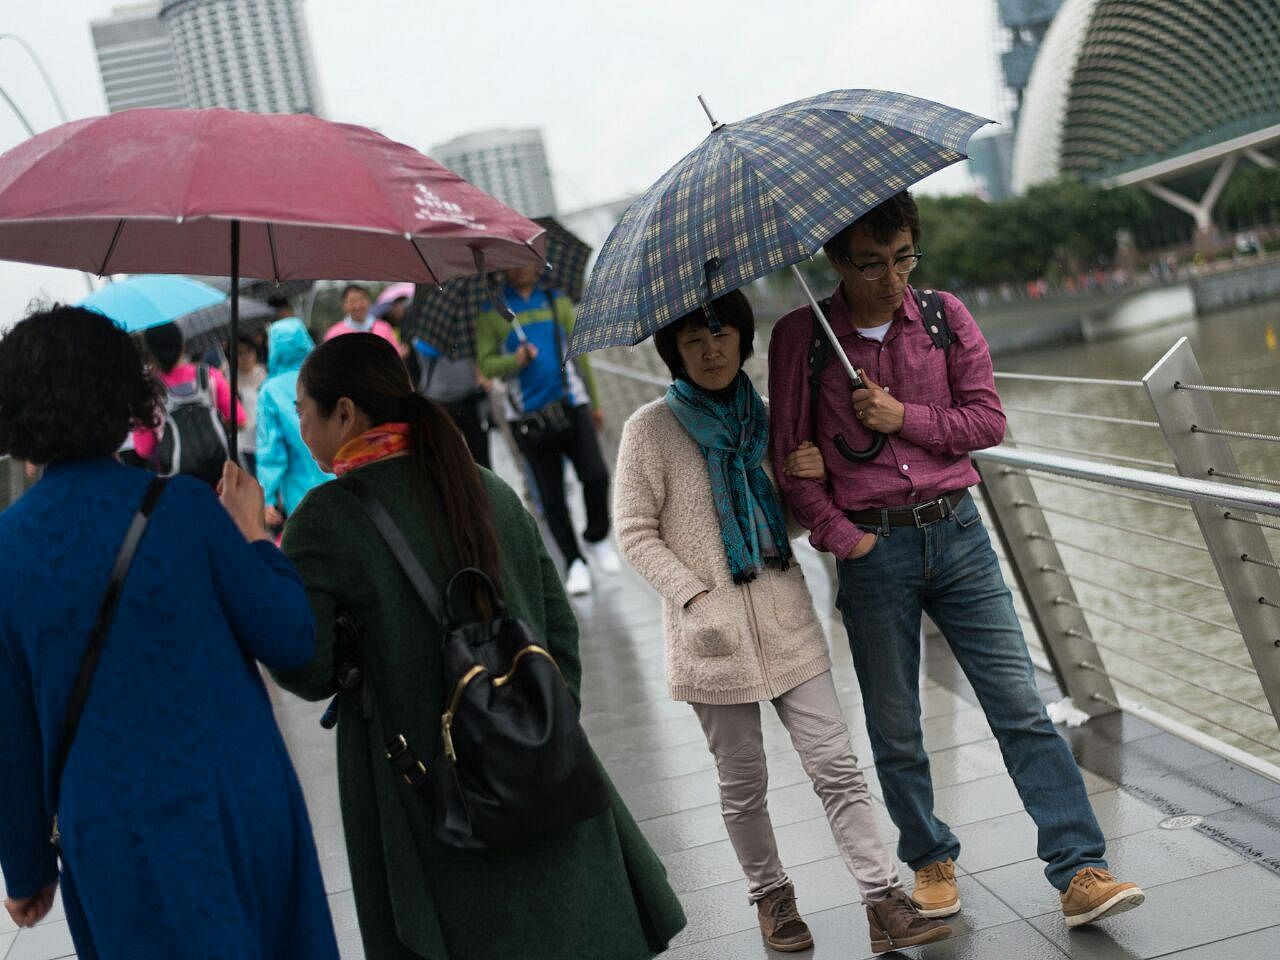 Suitably and warmly dressed for a stroll at Marina Bay in the cool, wet weather. At 21 deg C, we’re reaching for autumn-winter gear. ST PHOTO: ALVIN HO